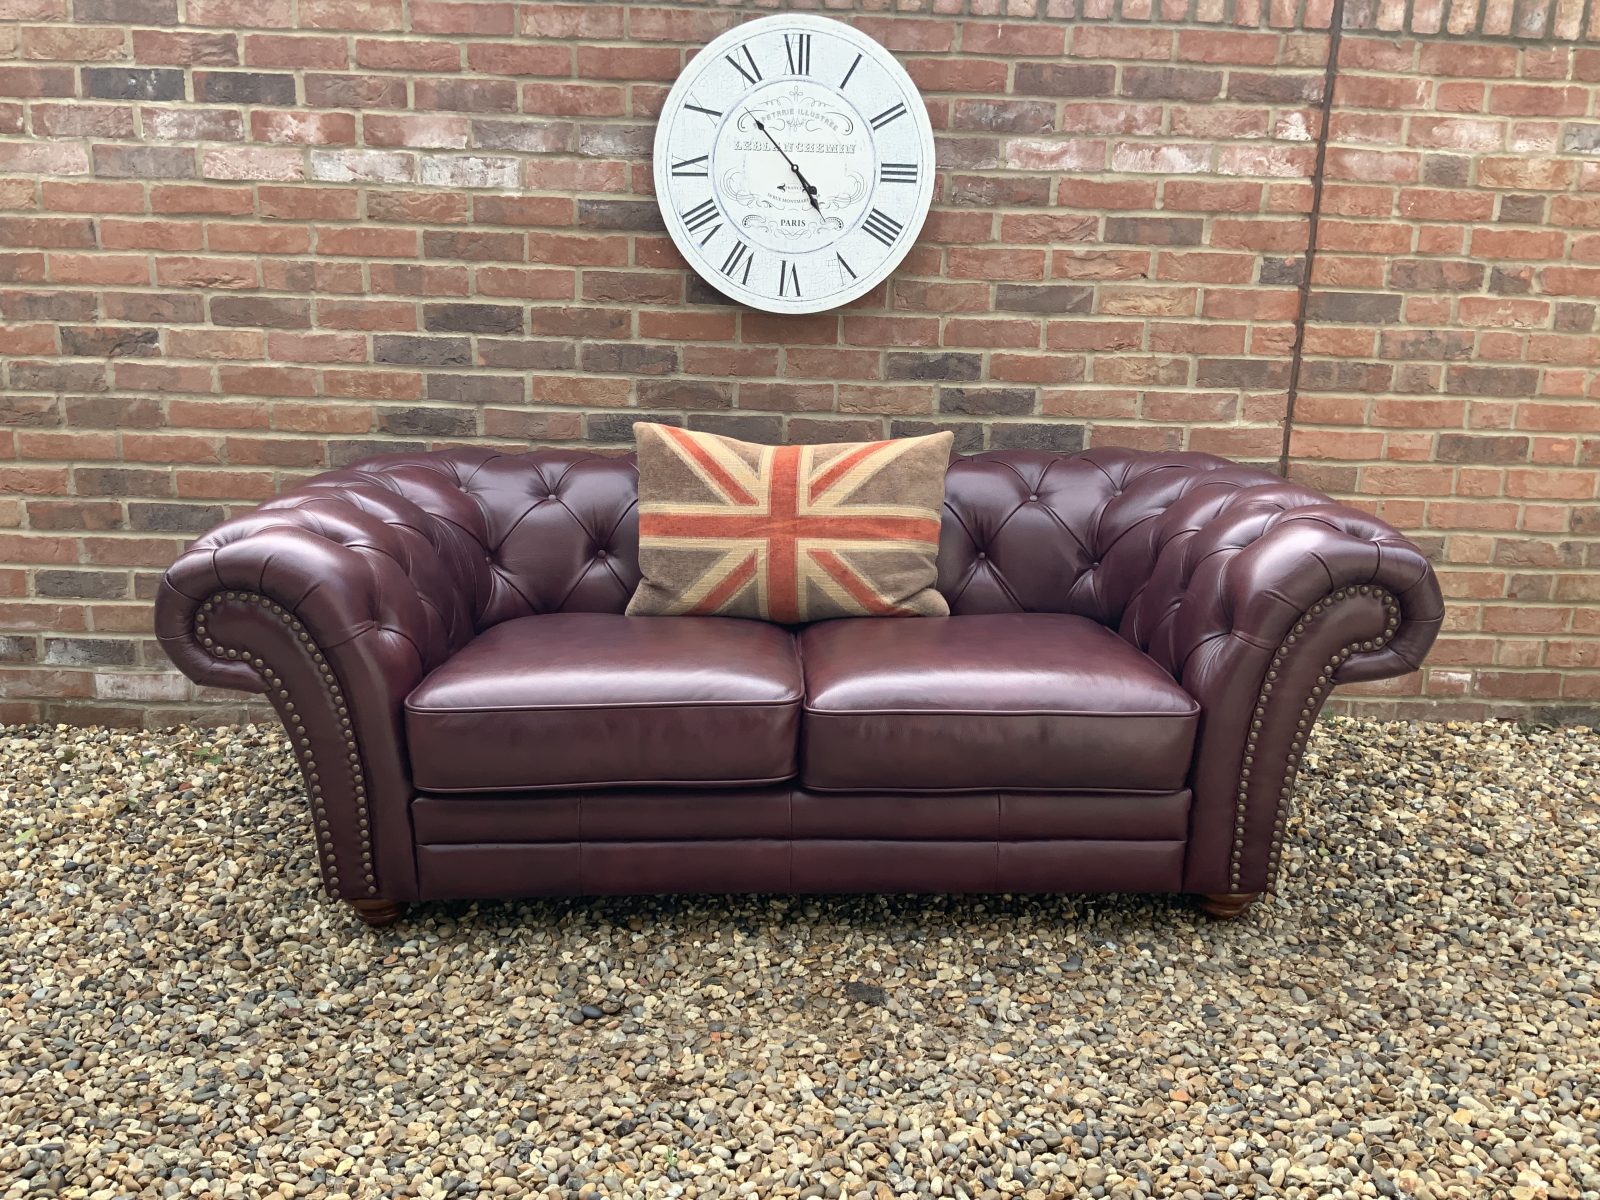 Claret Red Large 2 Seater Chesterfield Sofa. (Matching 3 Seater Available)